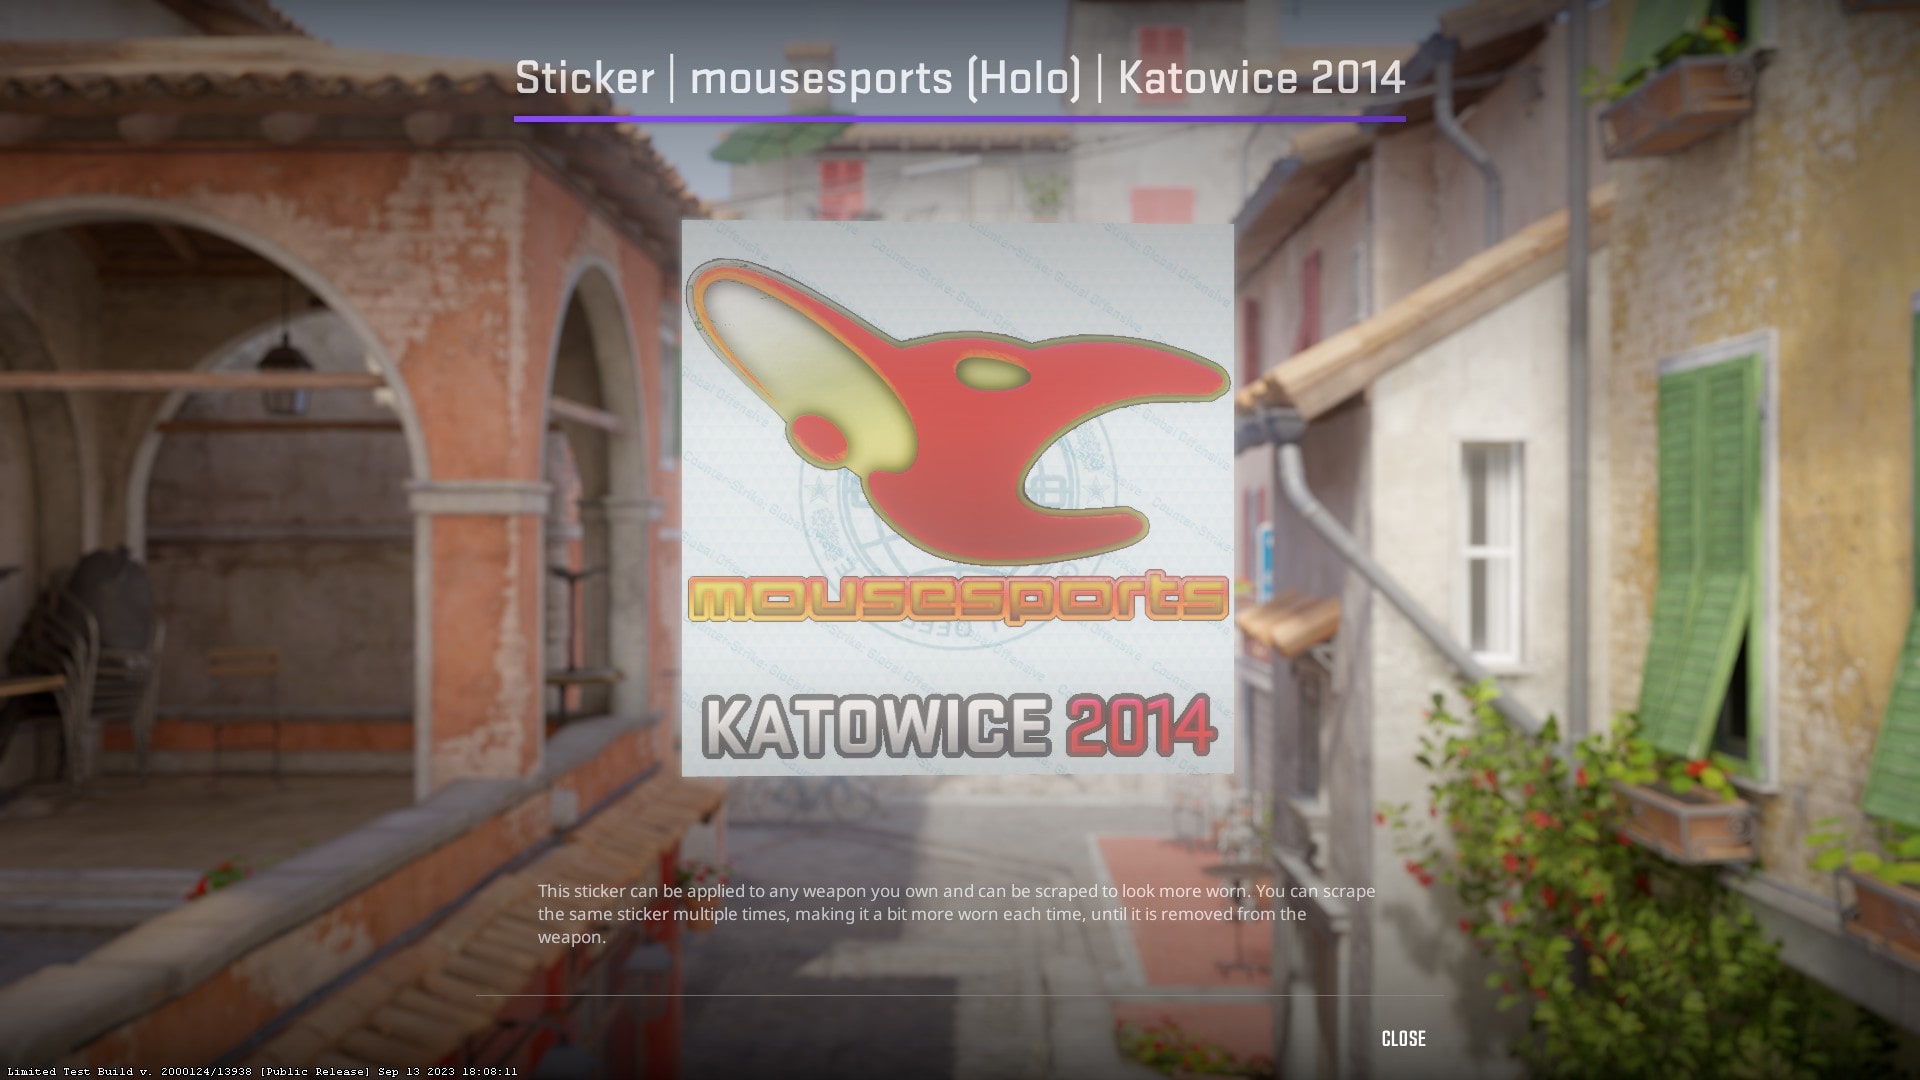 Sticker mousesports (Holo) Katowice 2014 Current Price